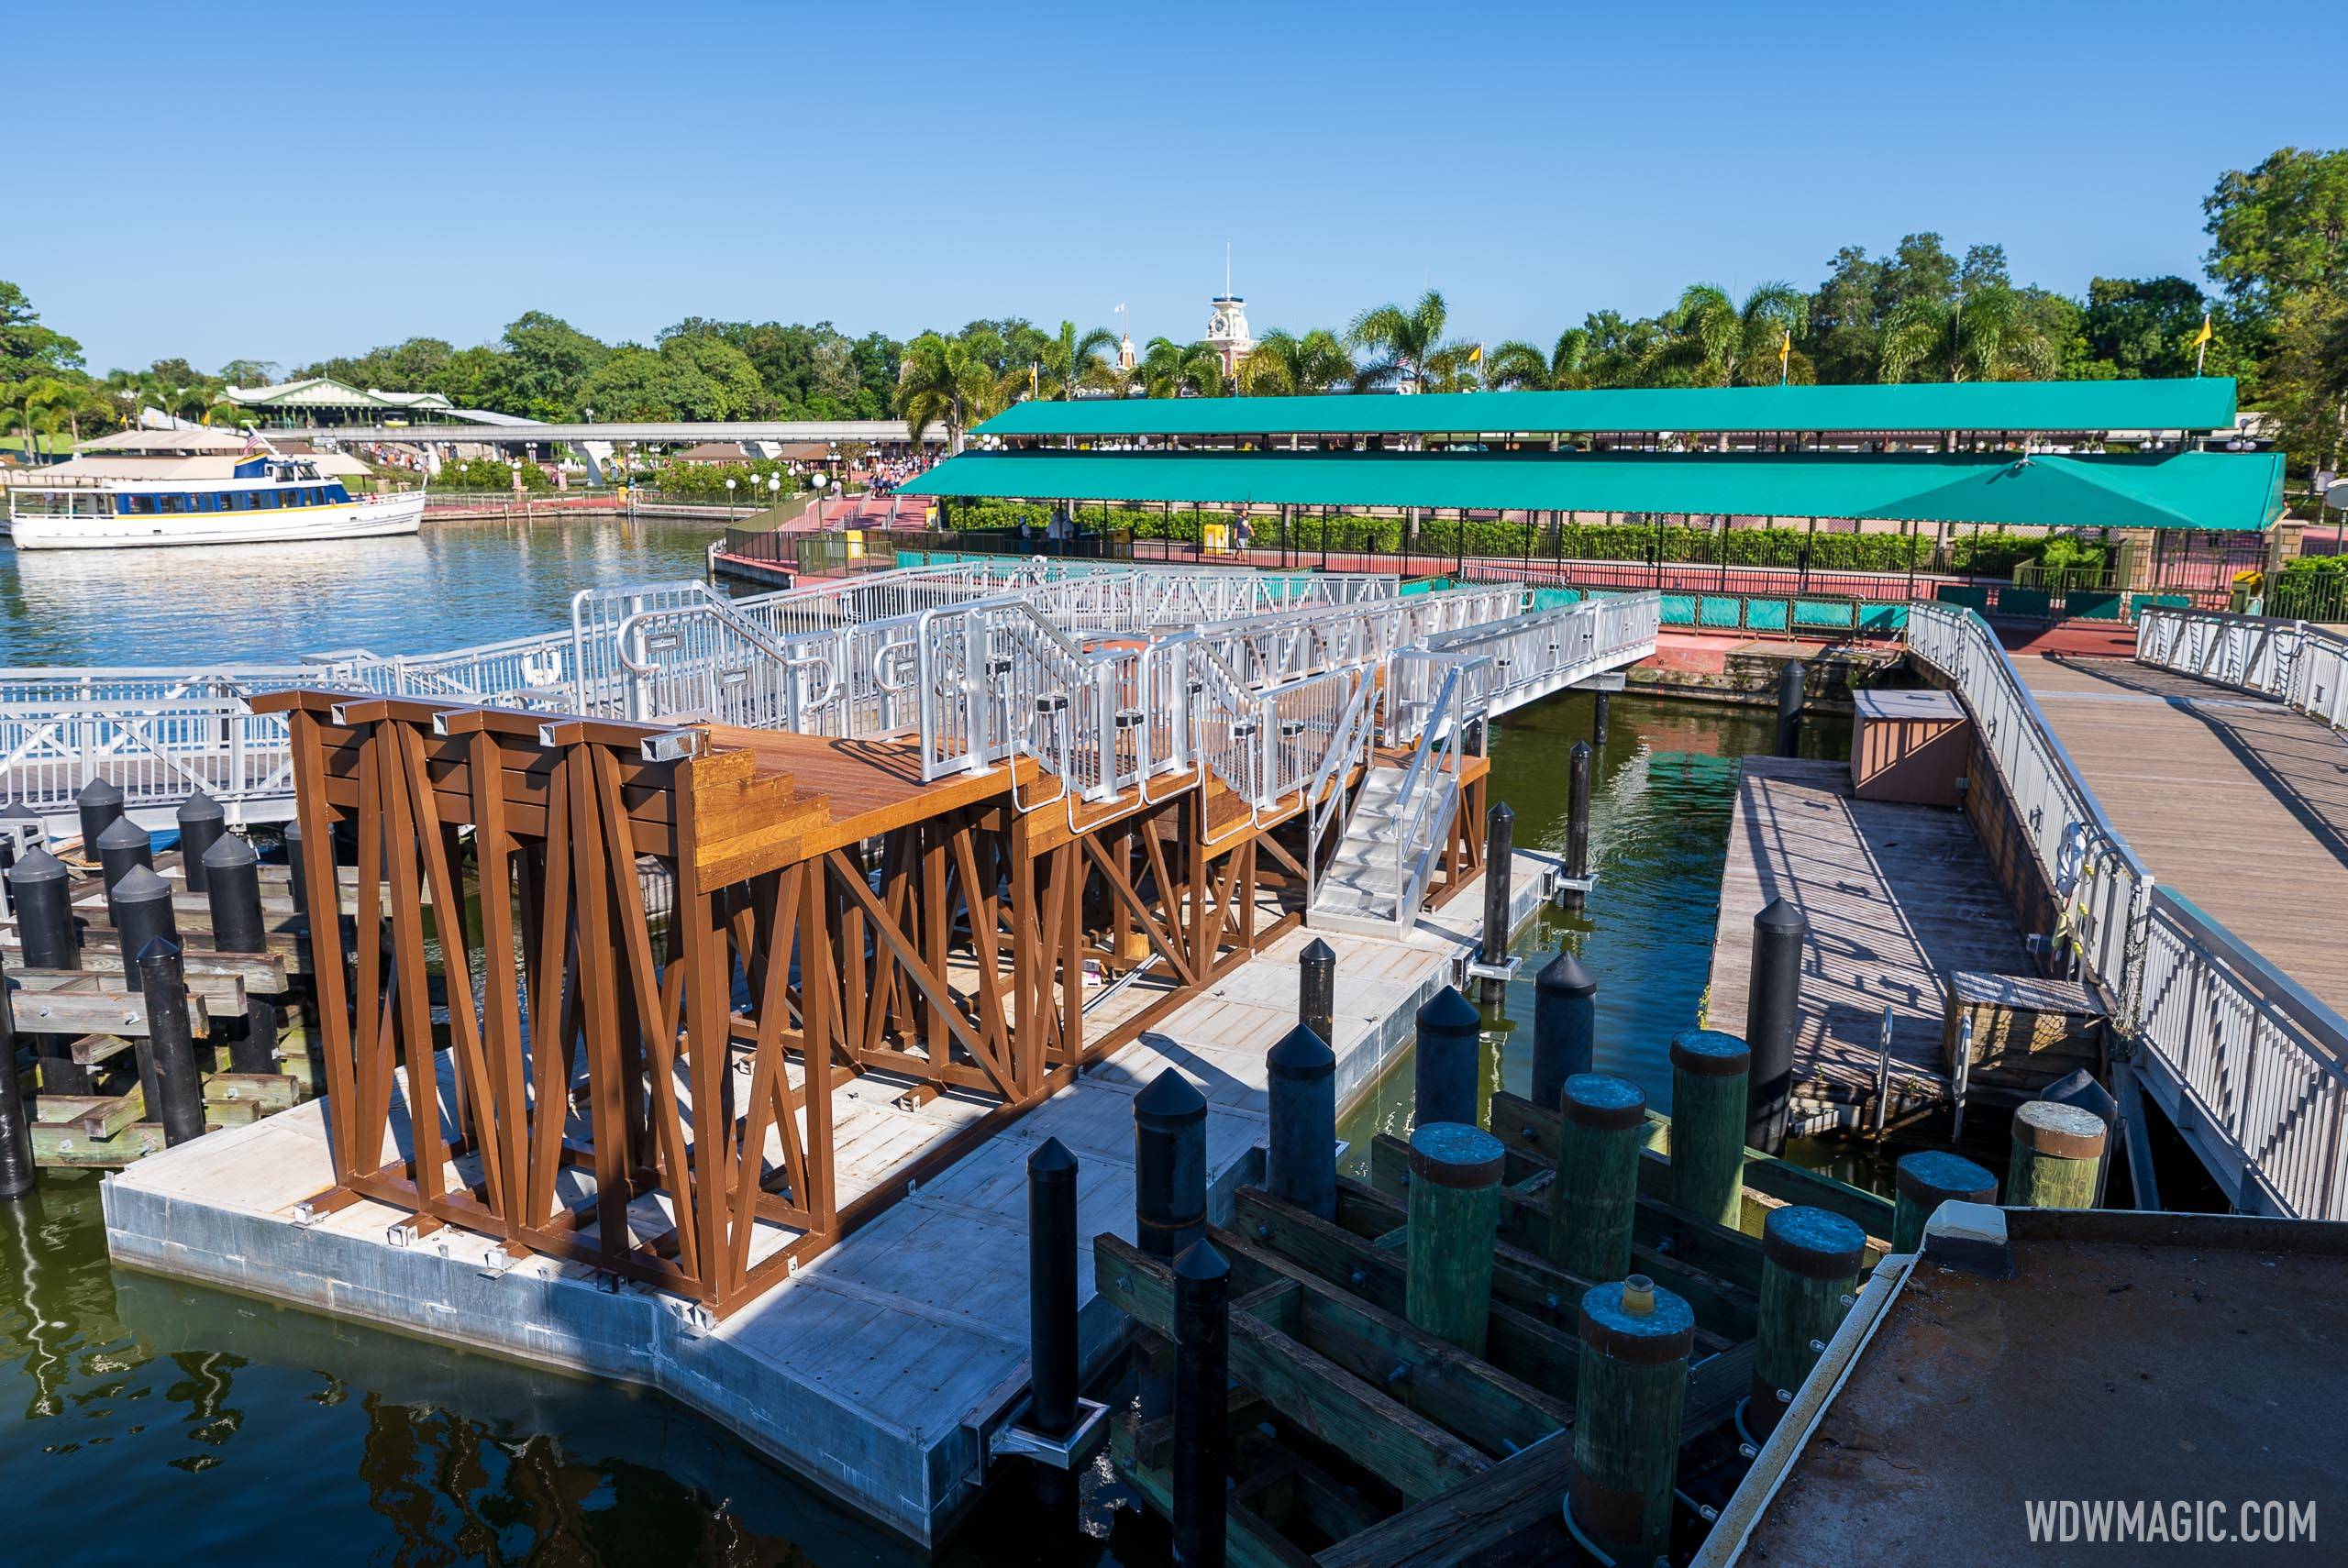 TTC Ferry Boat dock construction for second level access - September 26 2021